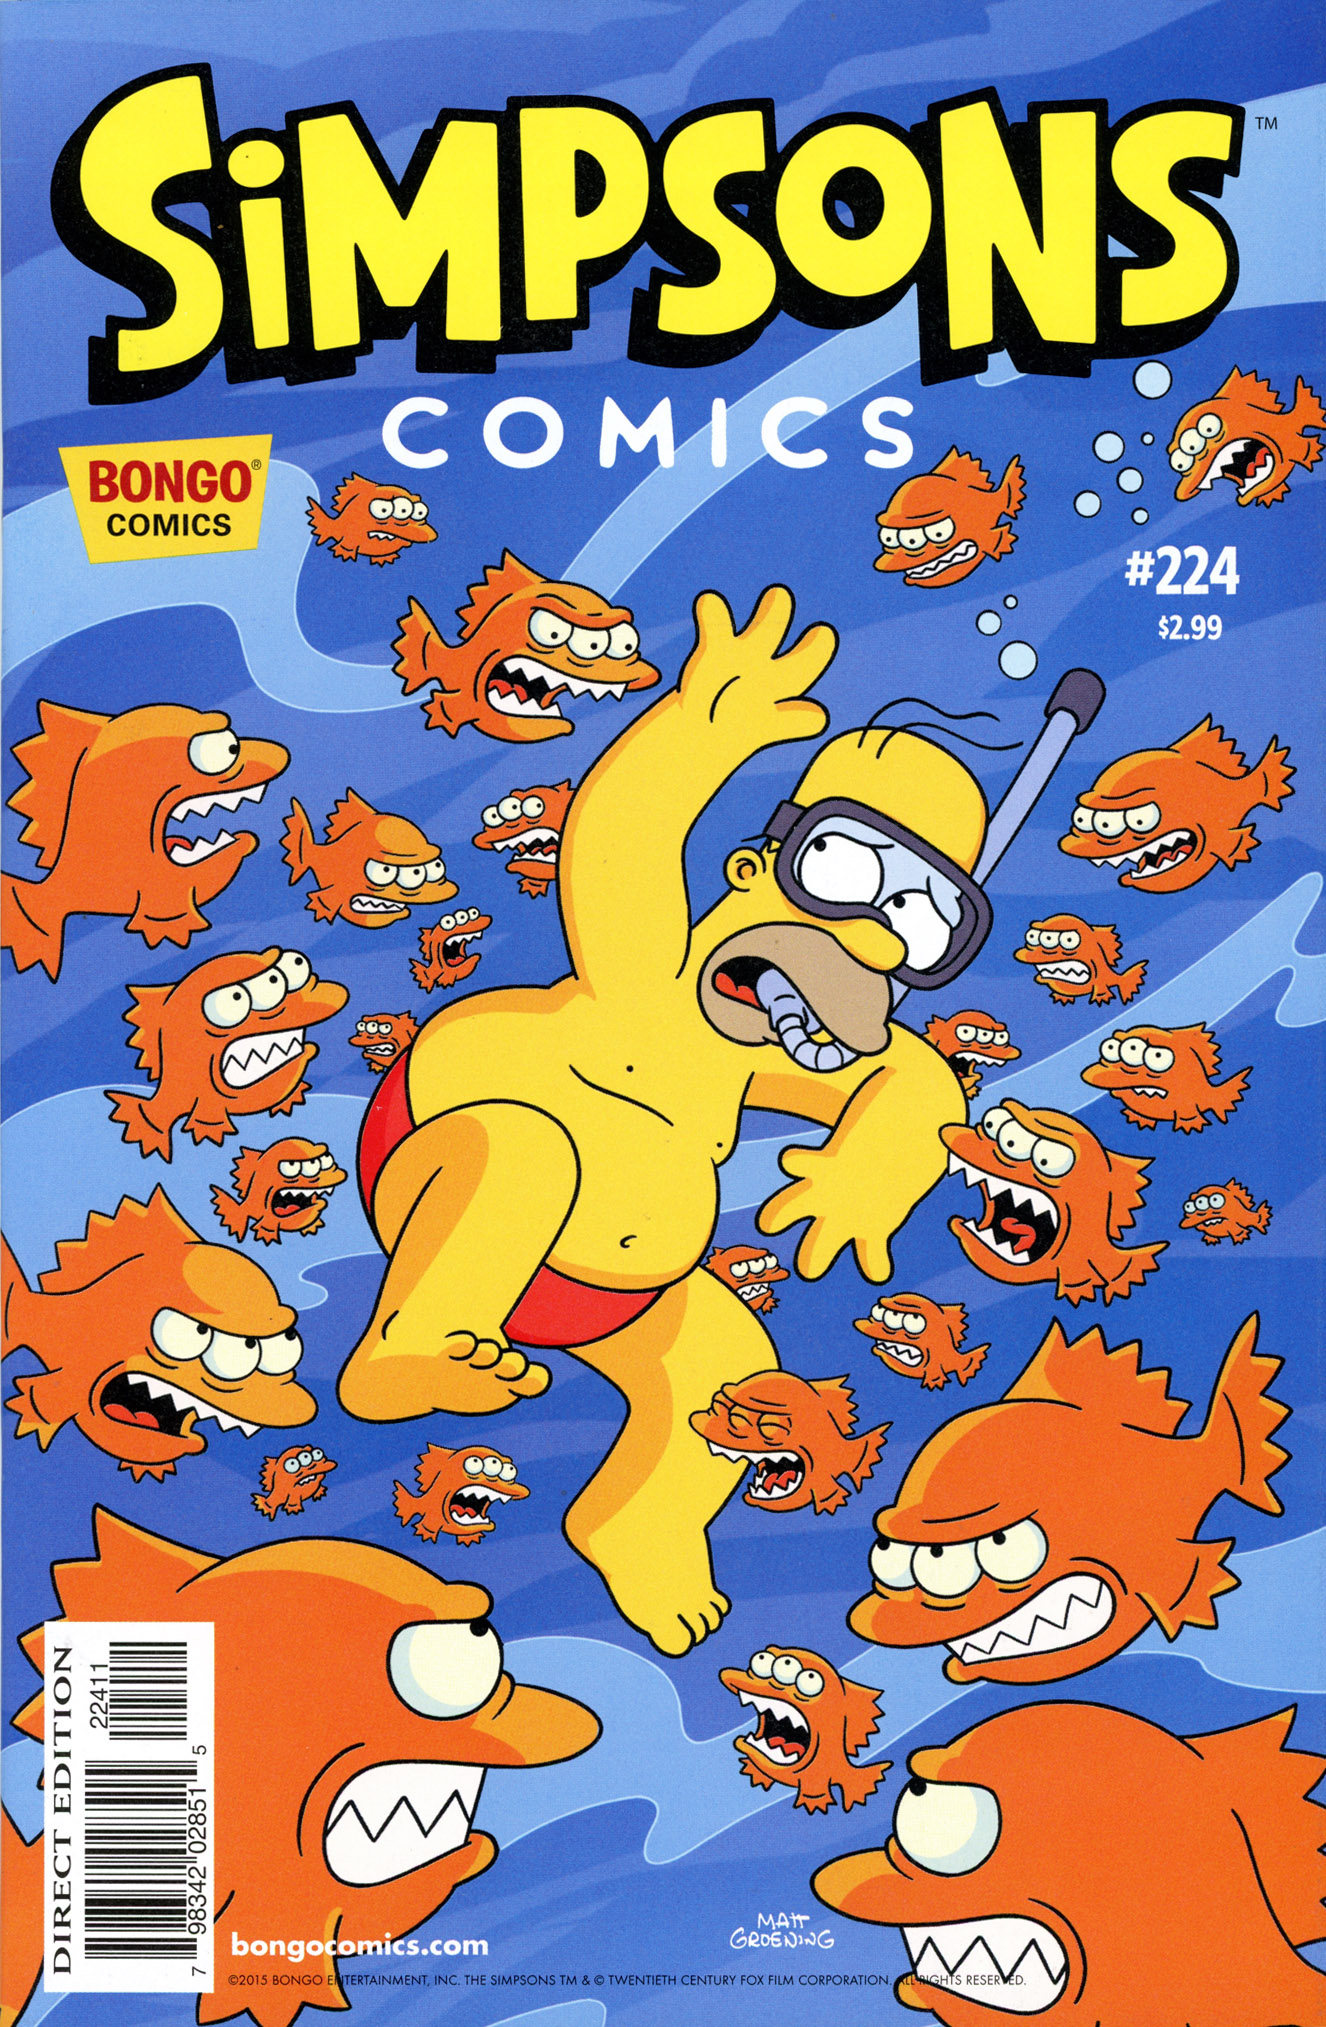 Simpsons Comics (1993-): Chapter 224 - Page 1